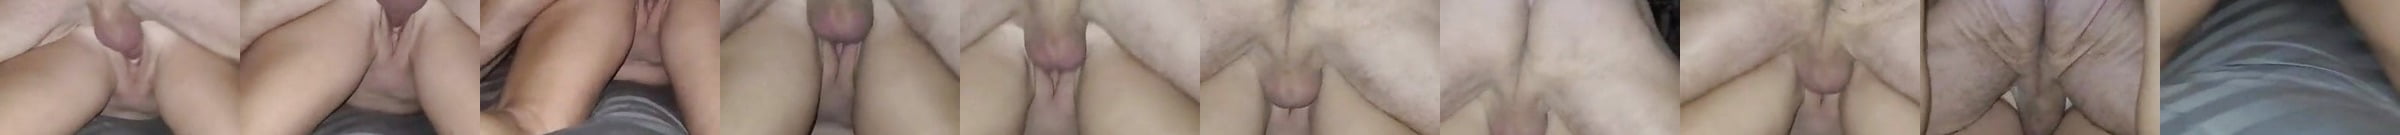 Wife Takes Bwc While Cuckold Husband Films Free Porn Bd